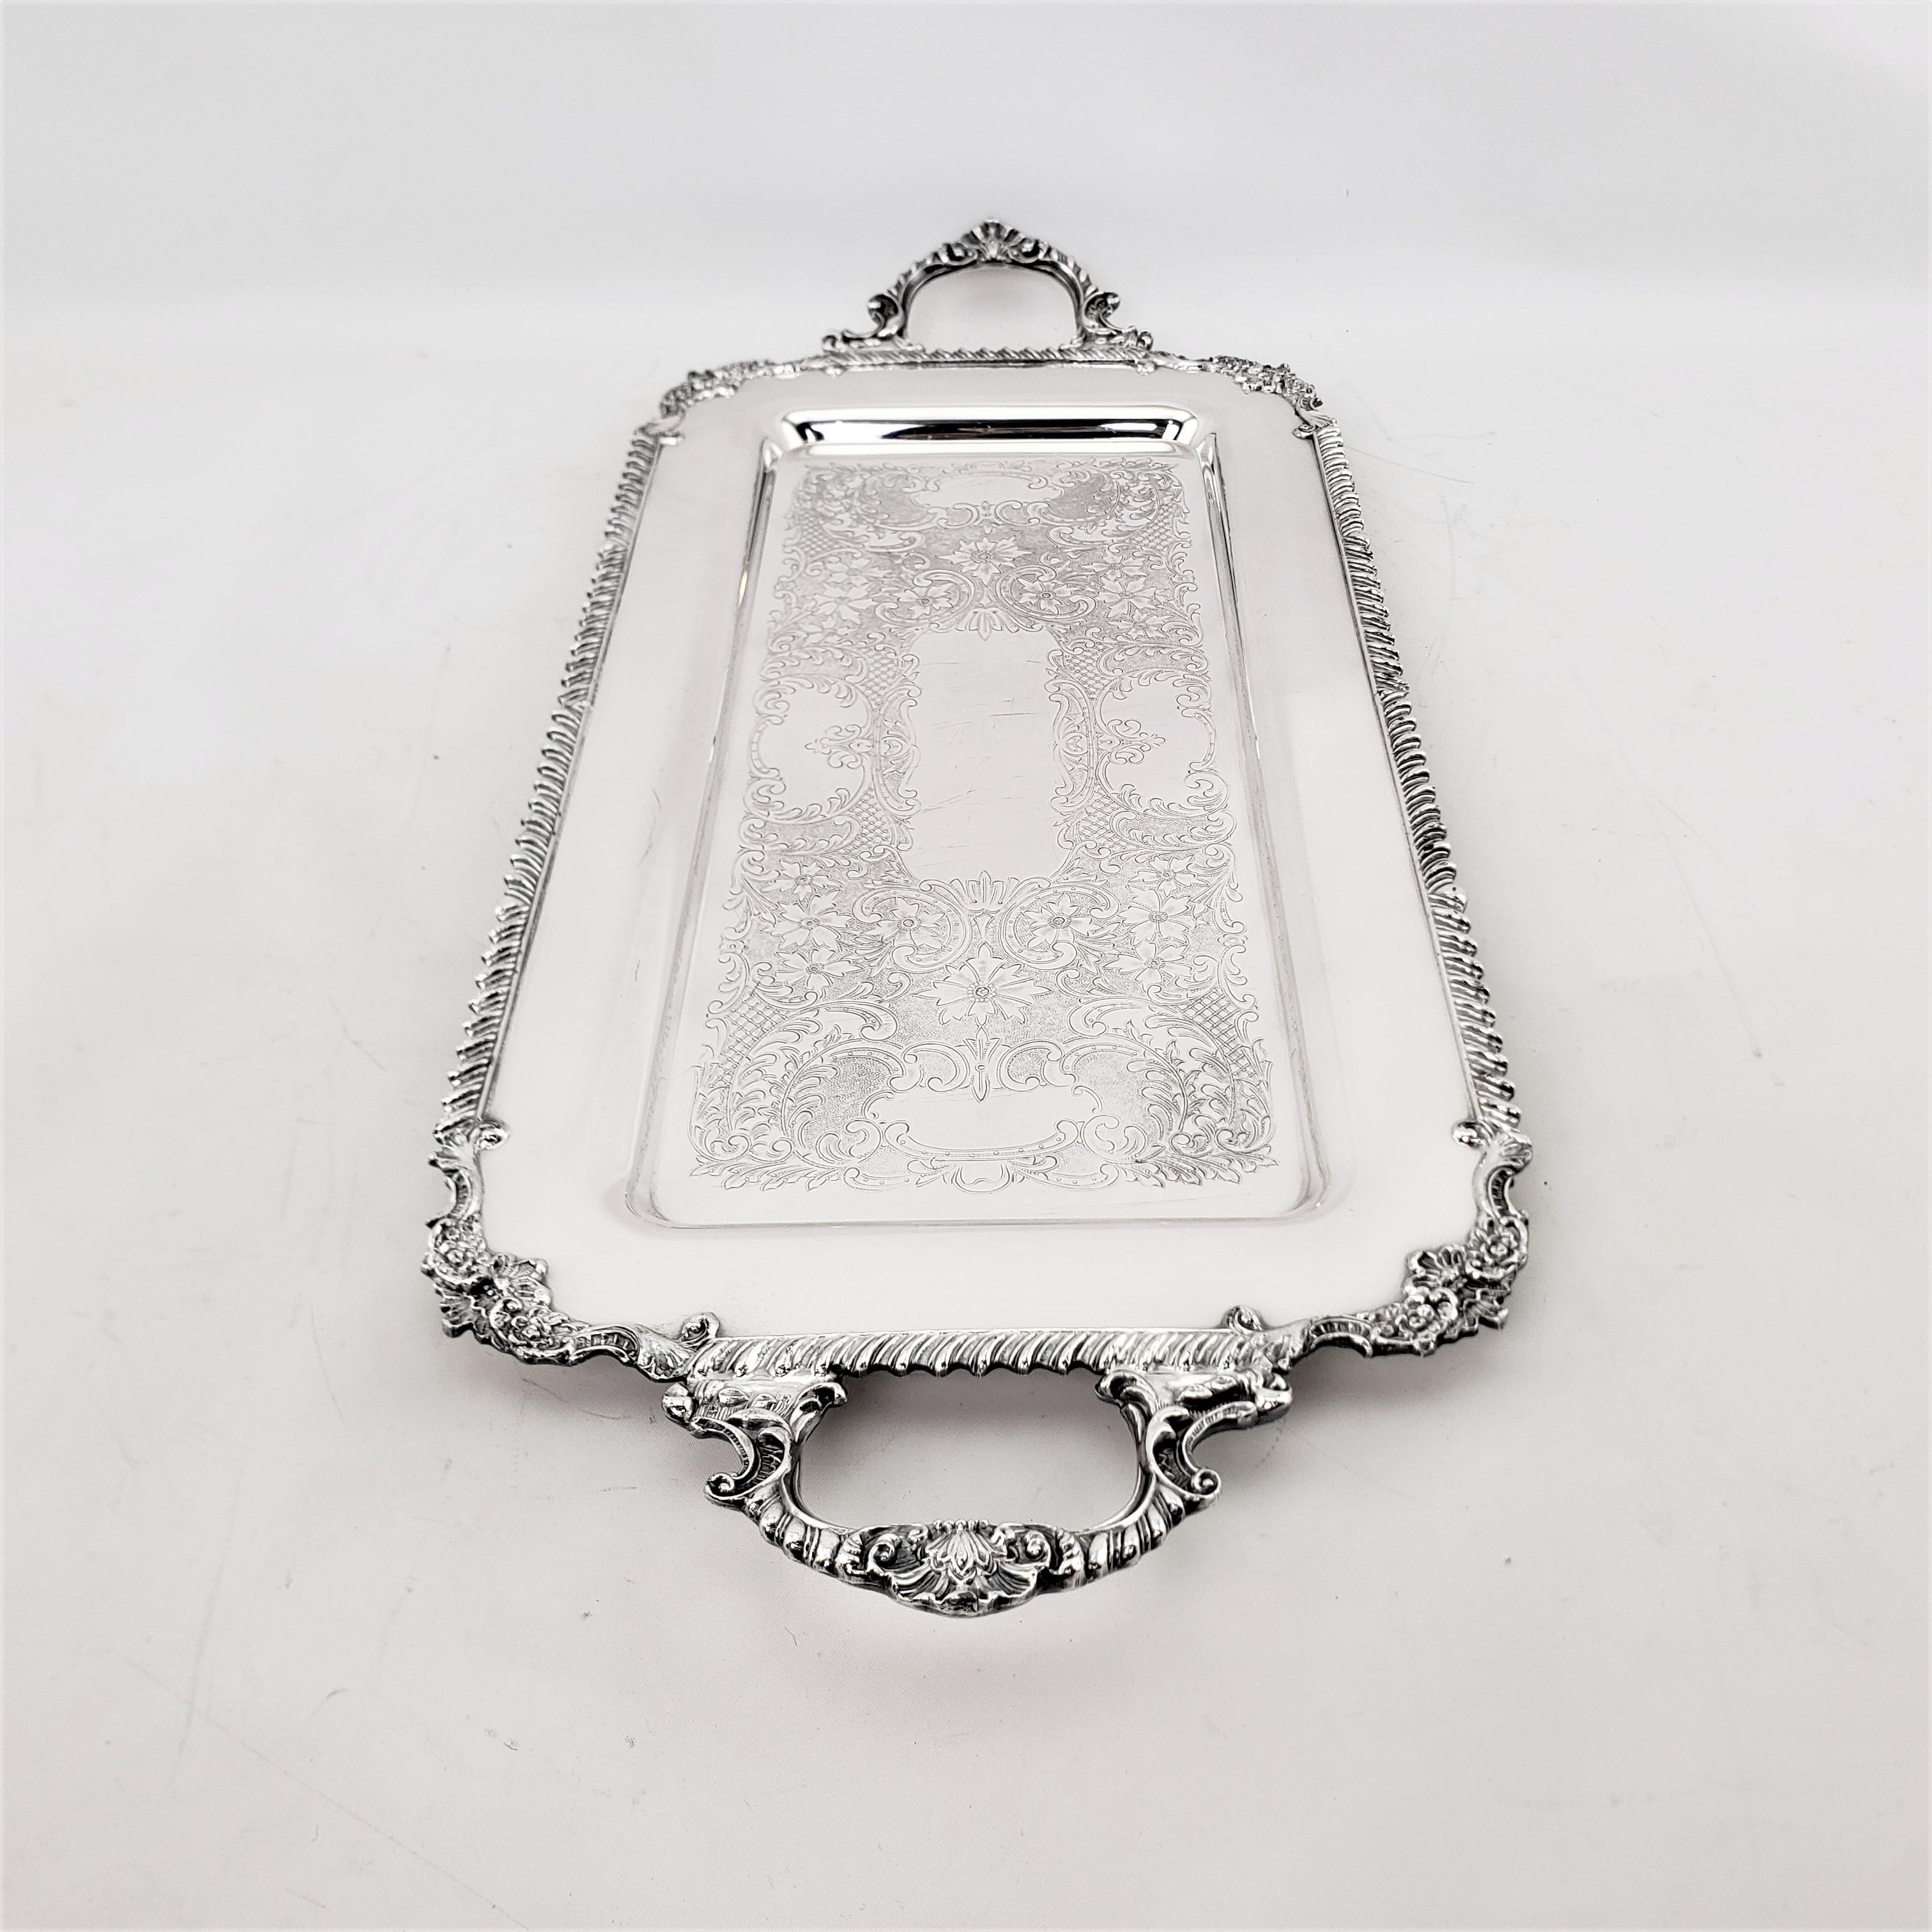 Antique Rectangular Silver Plated Serving Tray with Stylized Rope Decoration In Good Condition For Sale In Hamilton, Ontario